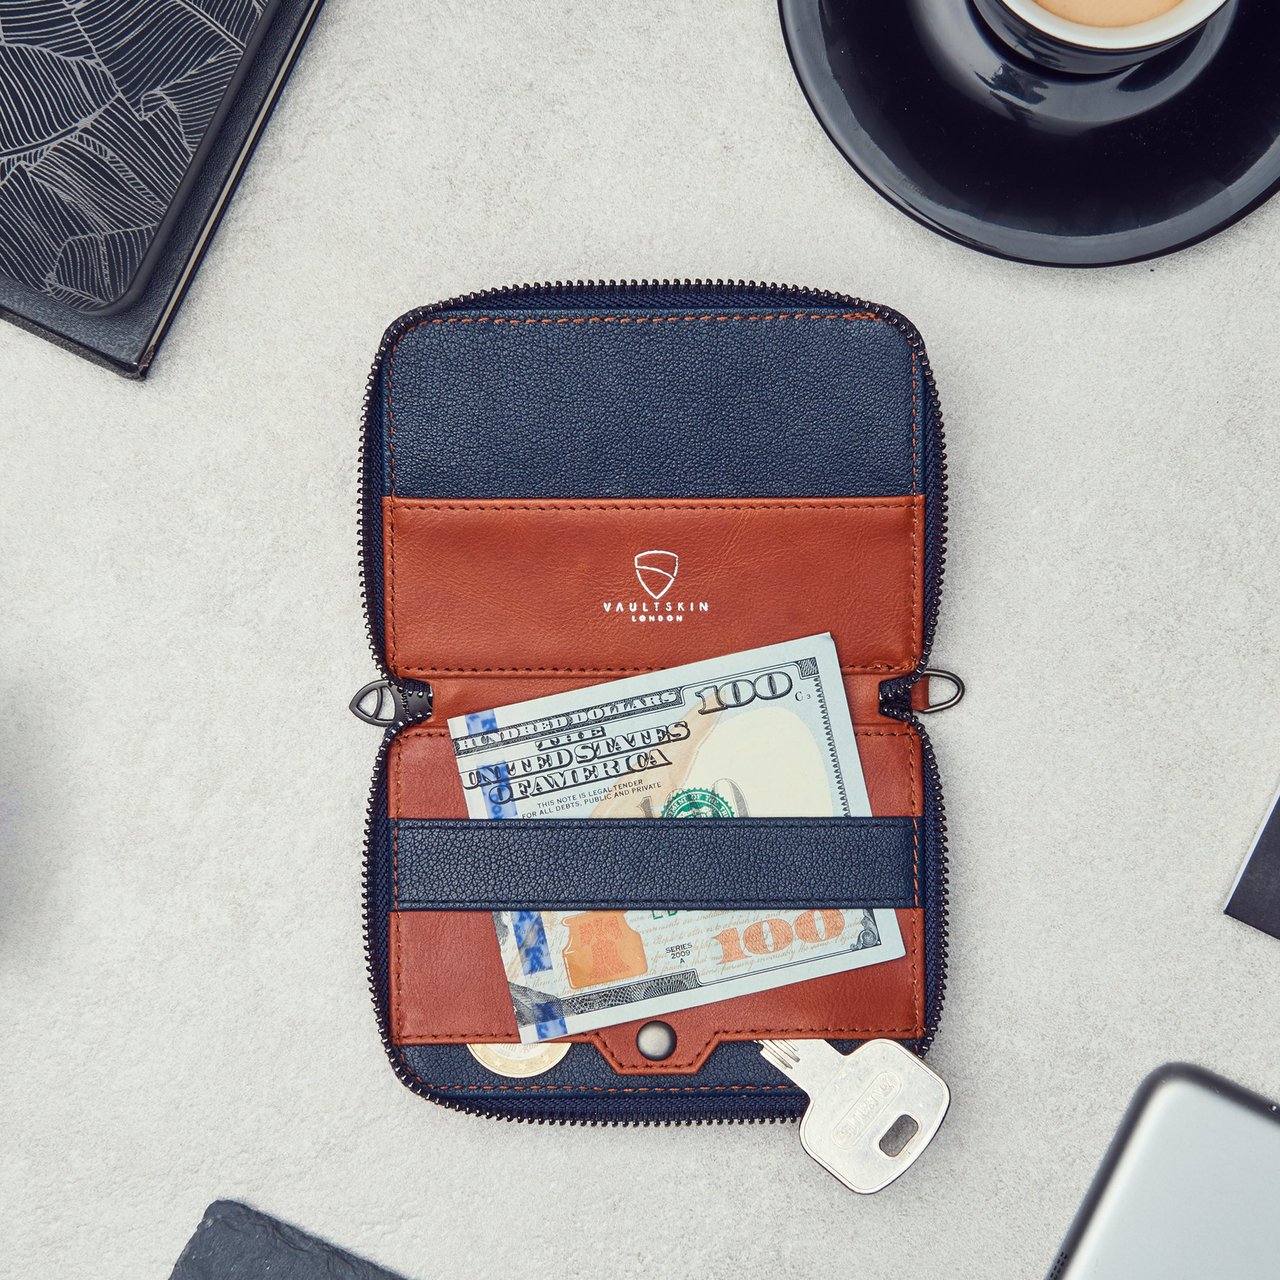 Notting Hill Slim Zip RFID Protection Wallet by Vaultskin